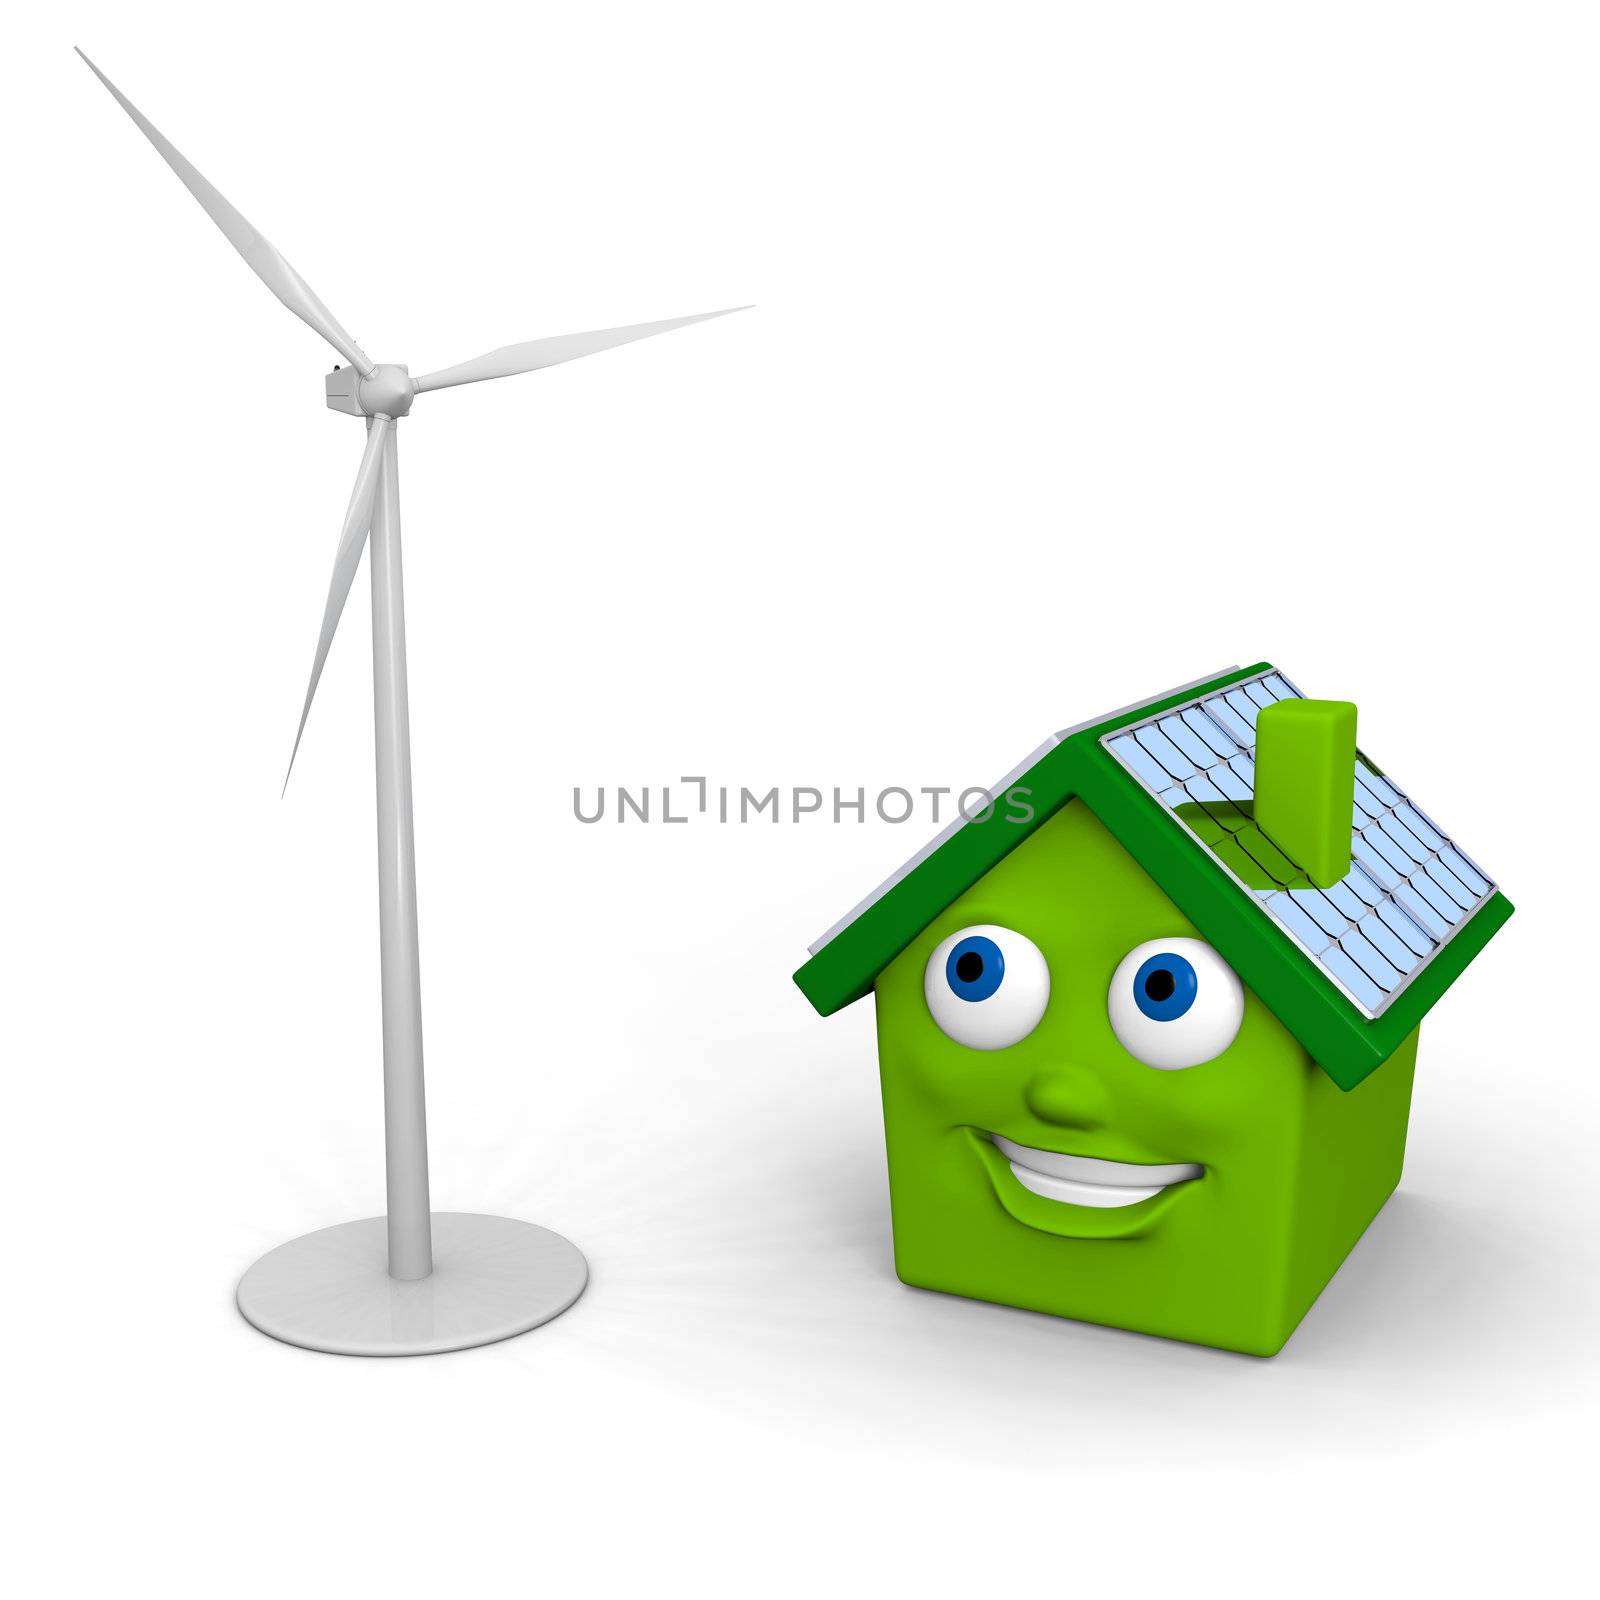 Green energy sources by Harvepino